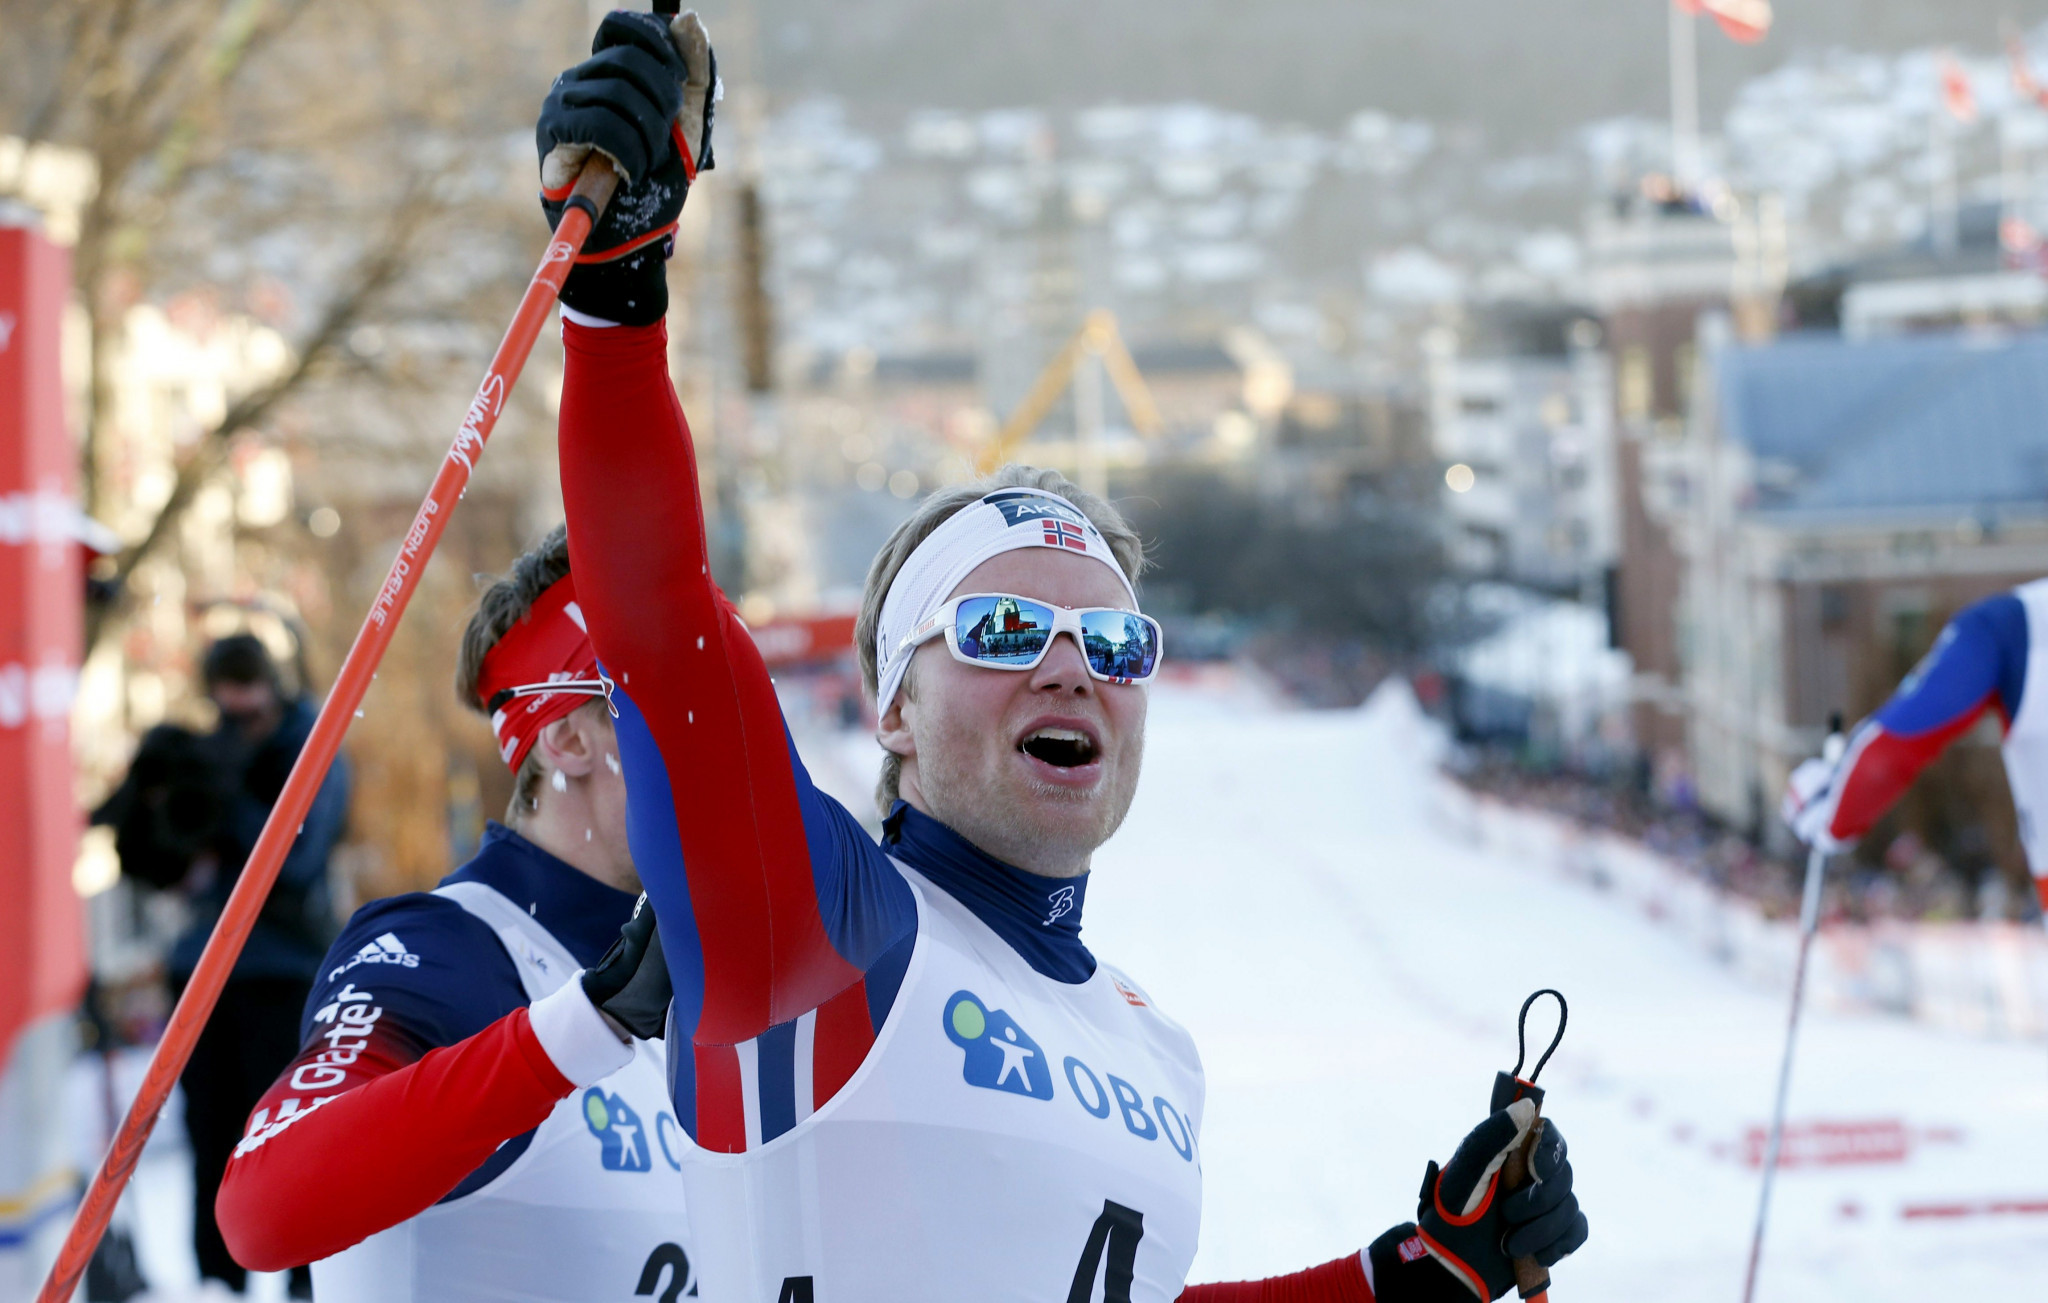 Norway's Brandsdal announces cross-country skiing retirement